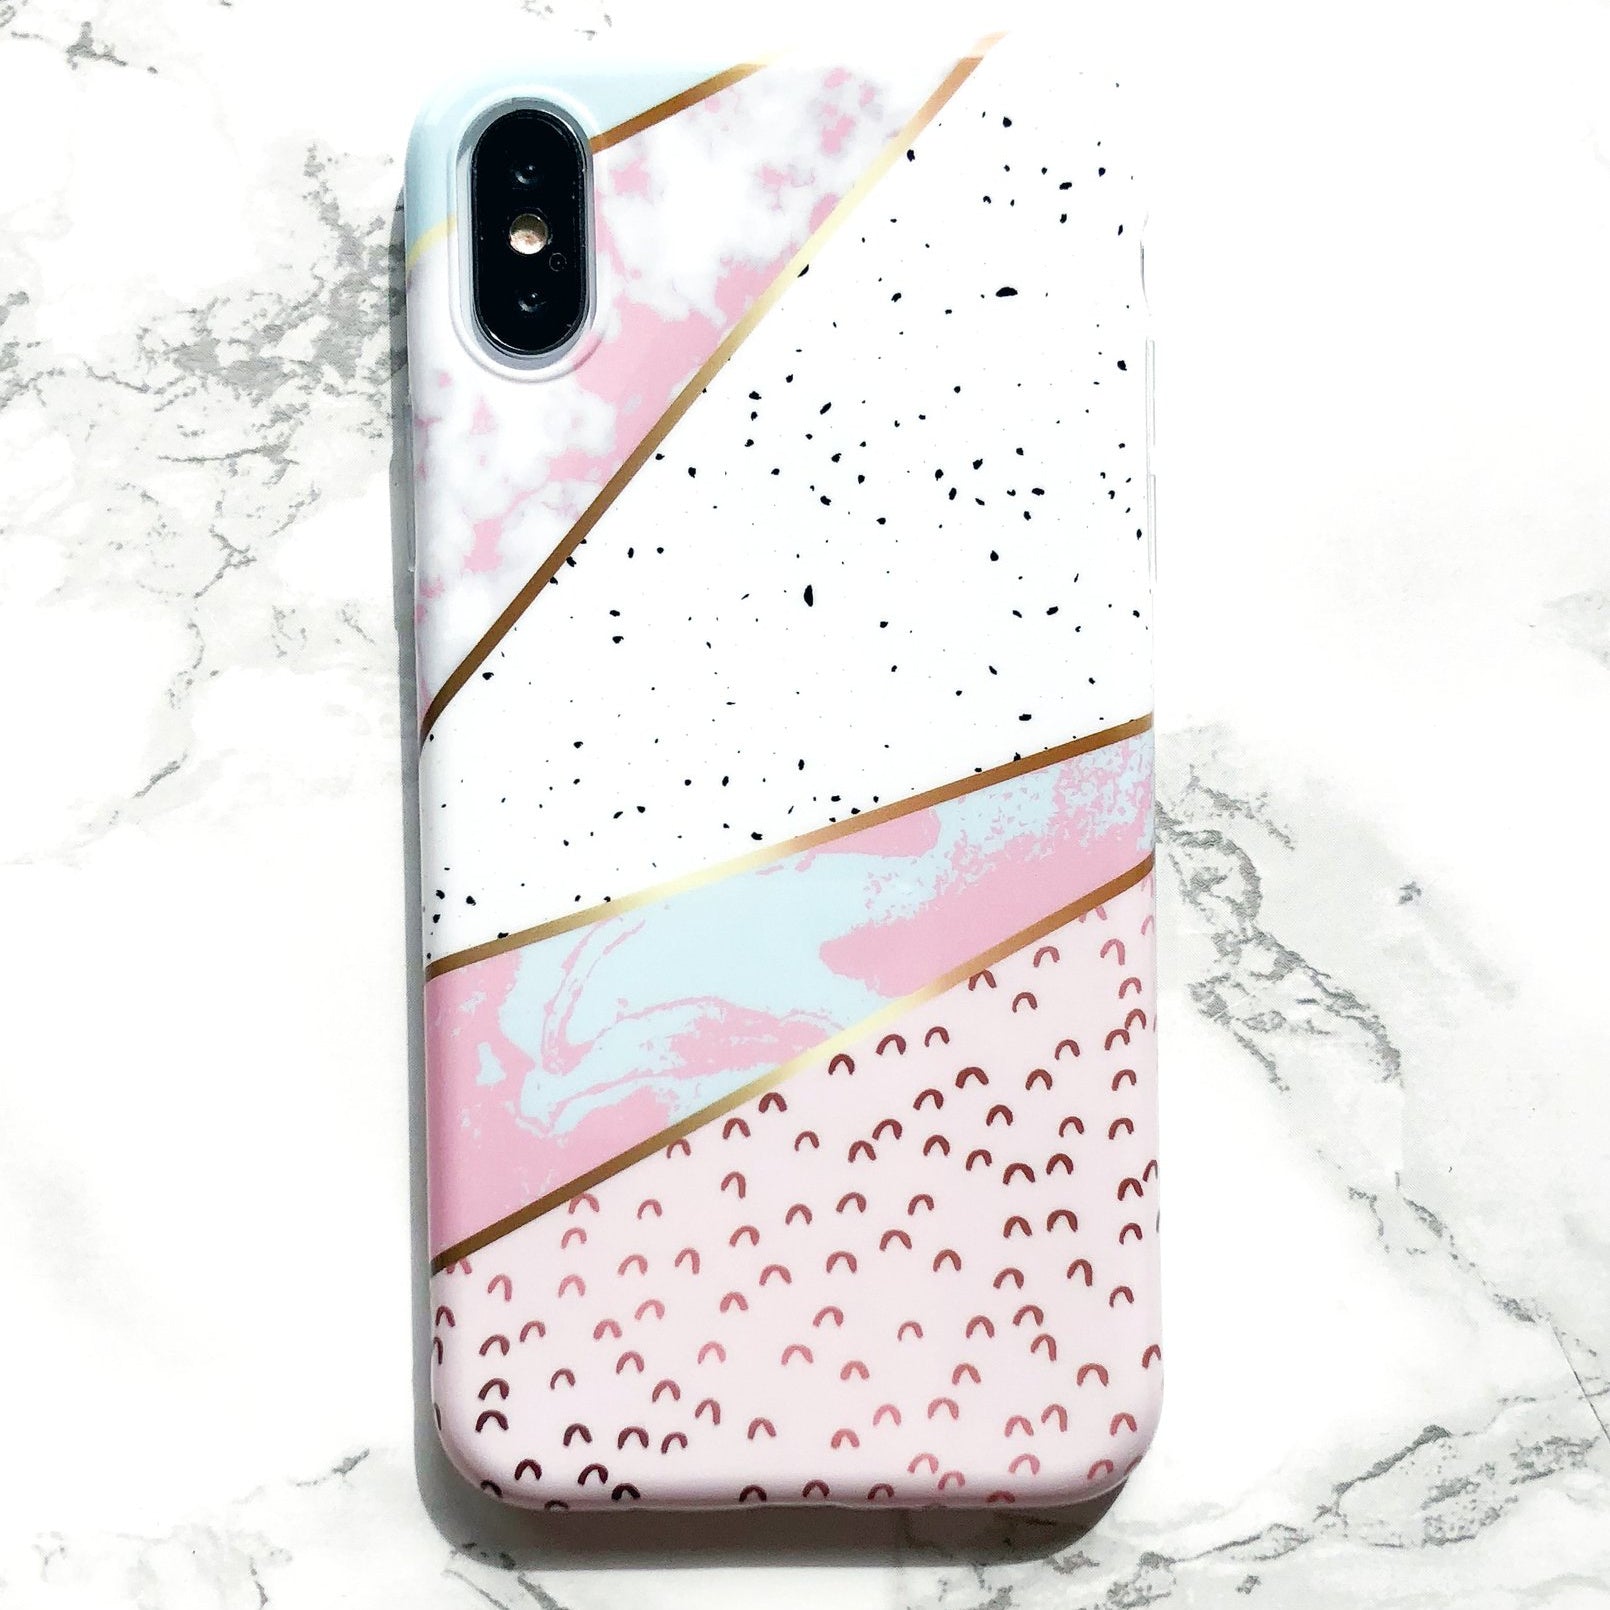 Cute Phone Cases - Highly Protective - 149+ Designs